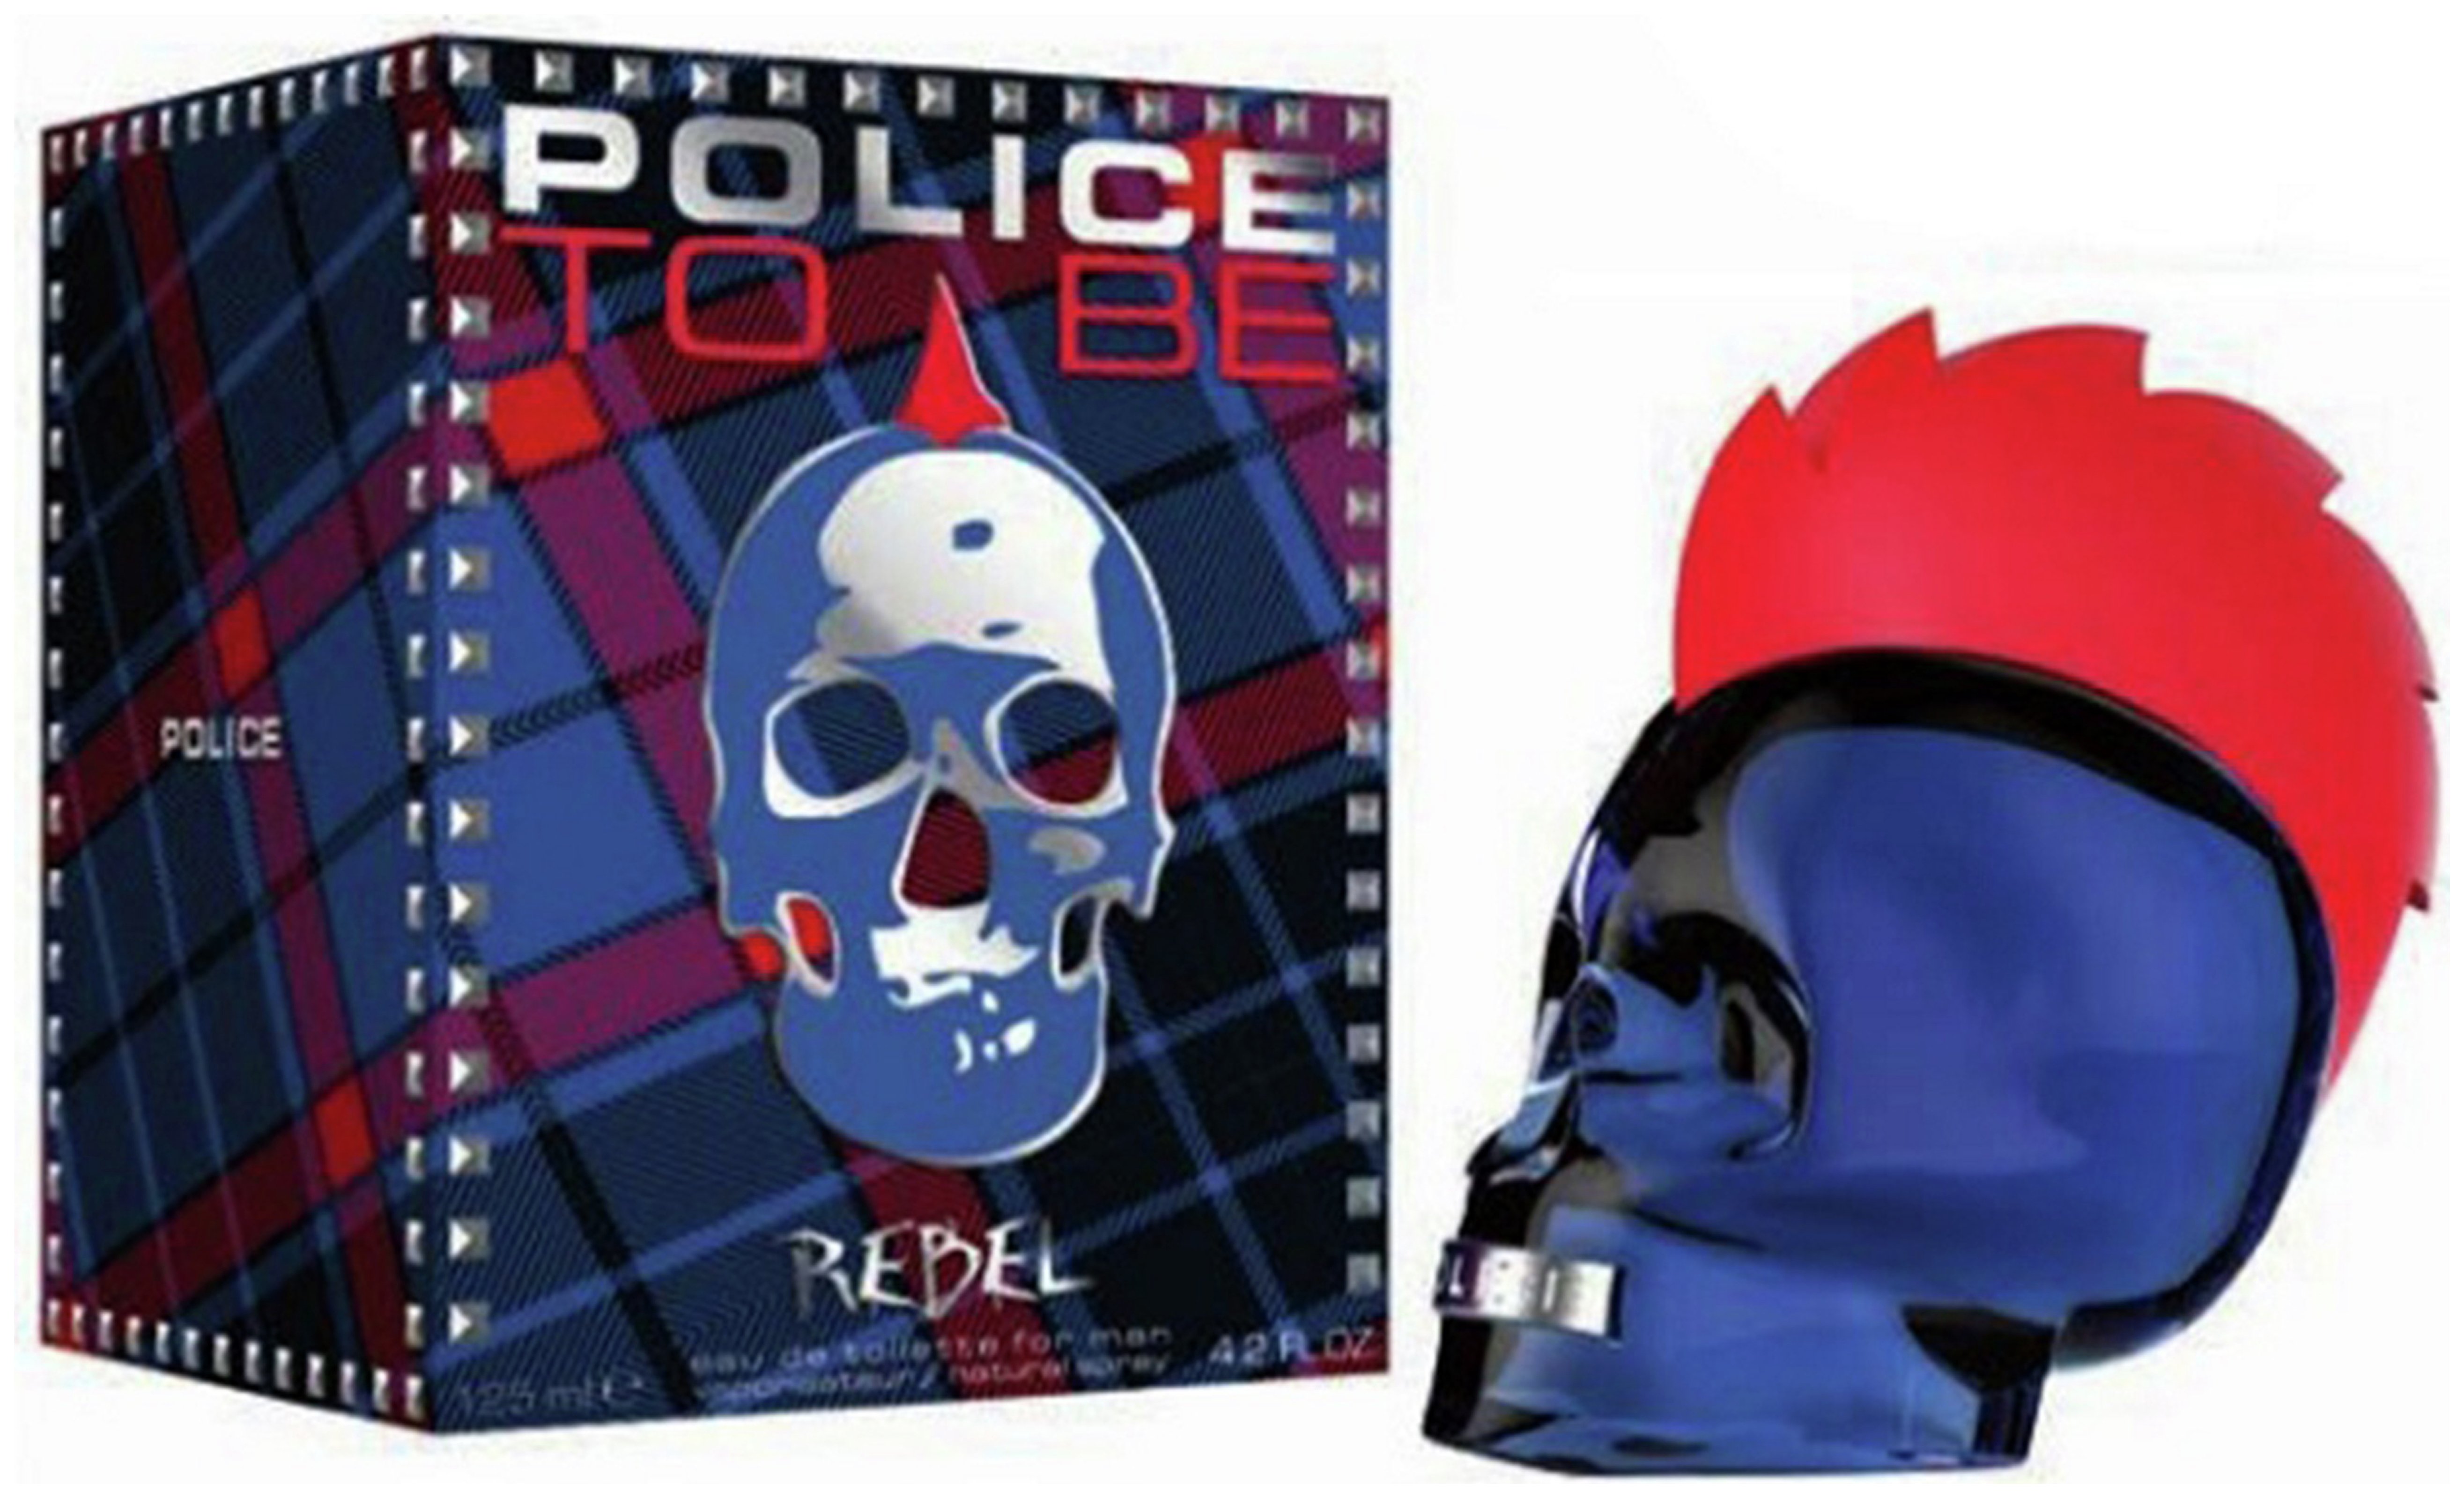 Police To Be Rebel Limited Edition Eau de Toilette review